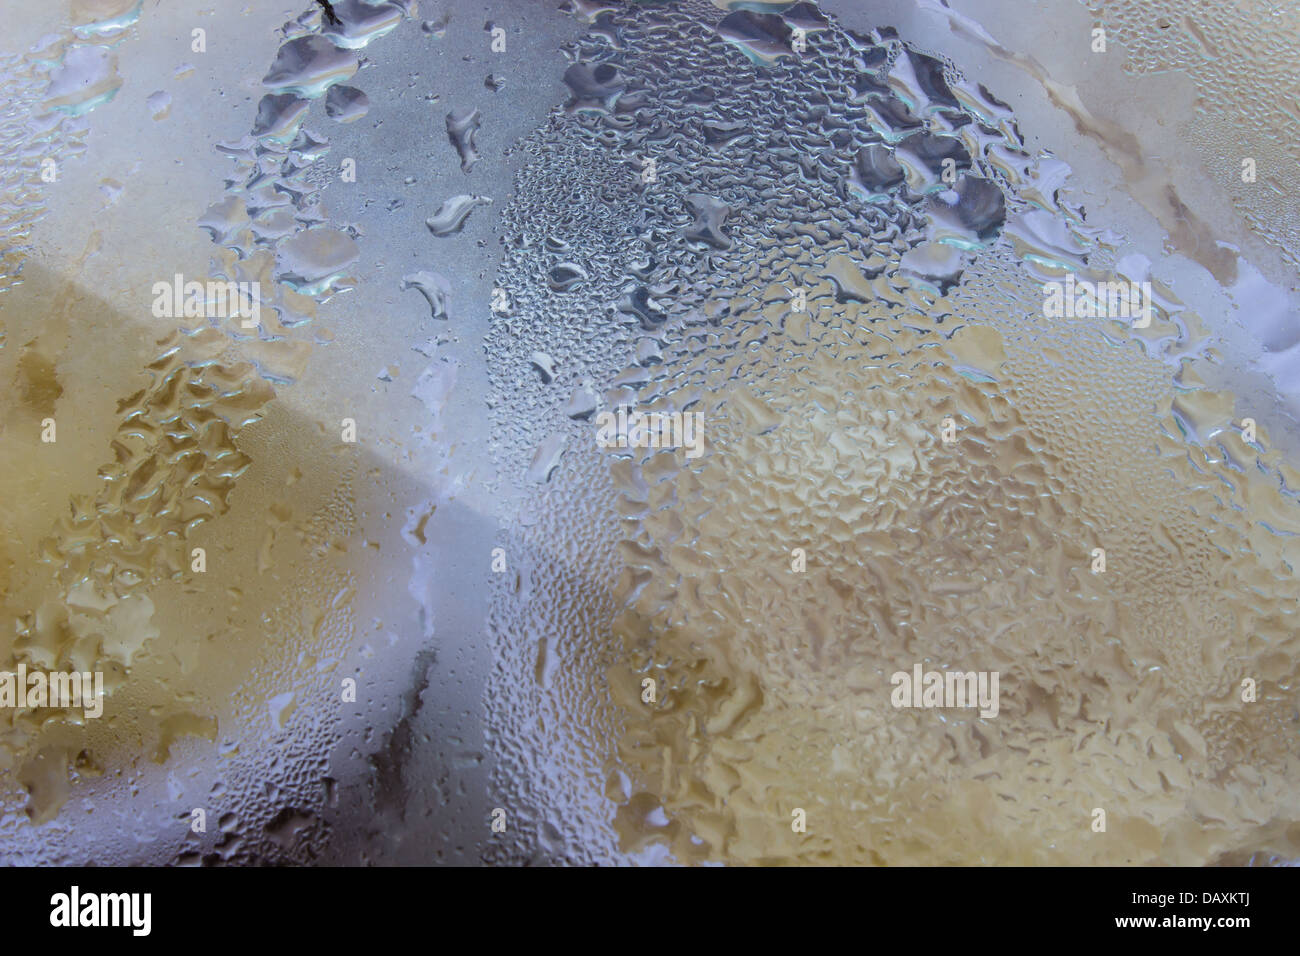 Water Drops from the pot. Stock Photo